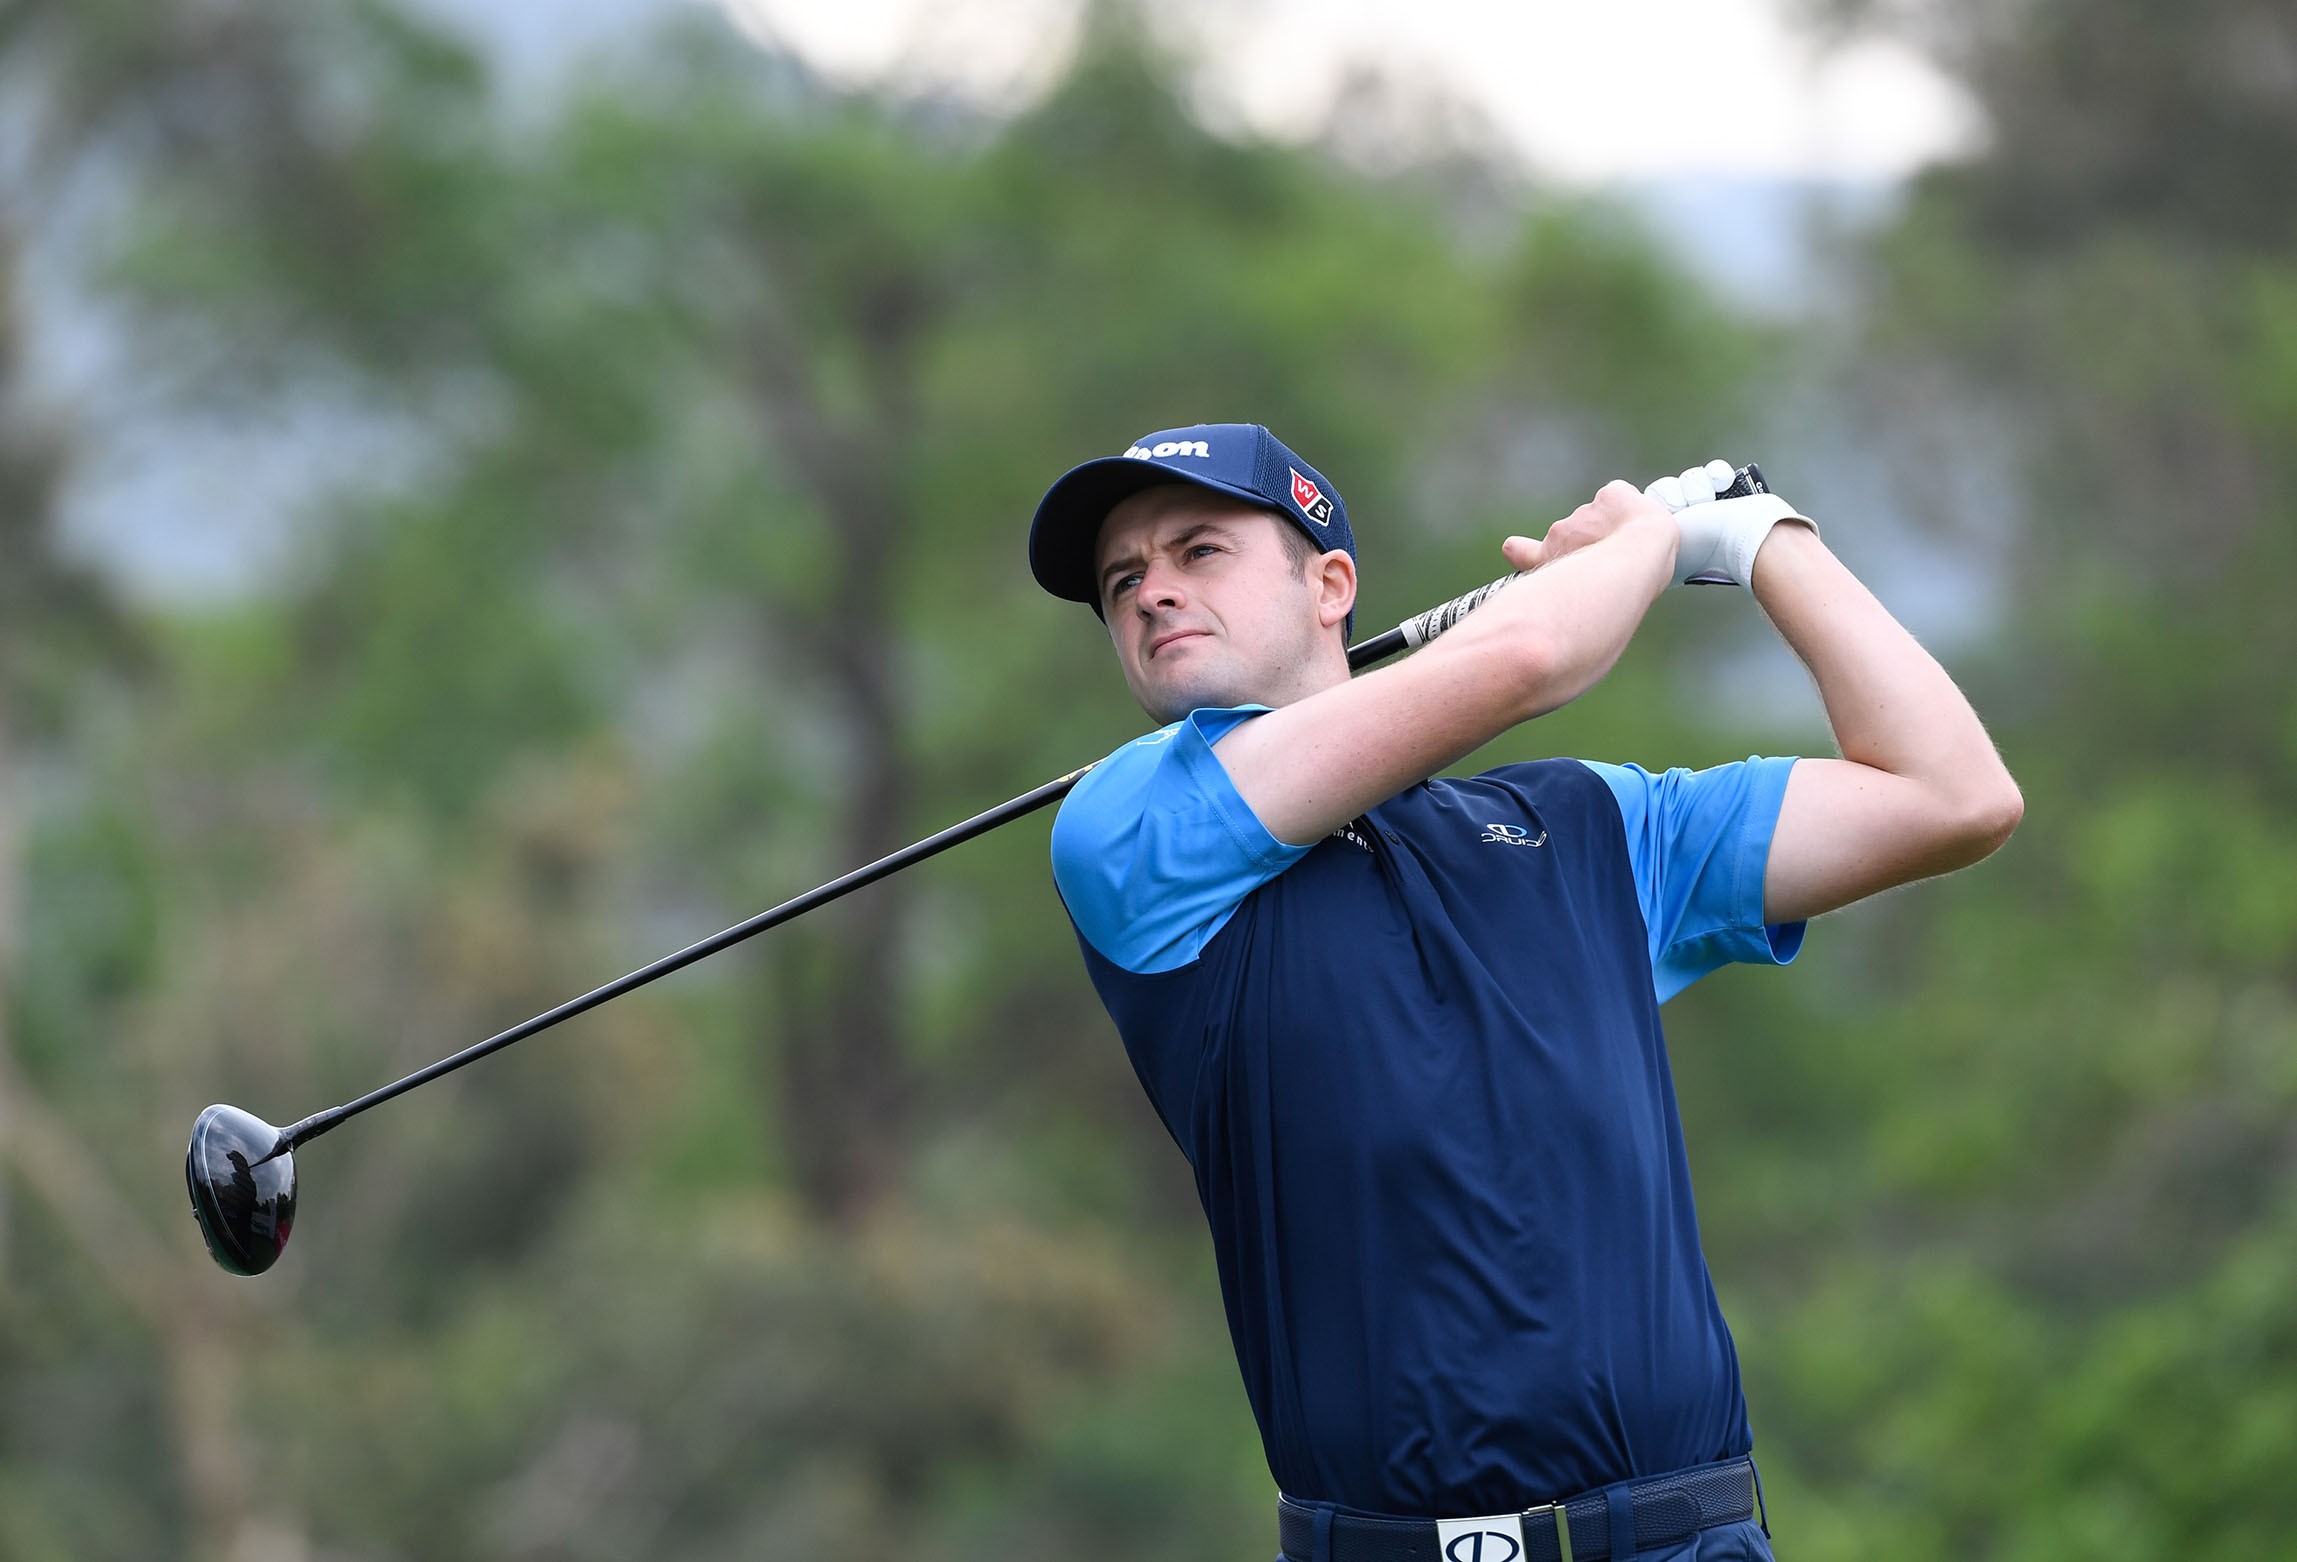 David Law, one of the four Scottish boys who joined the European Tour today. Photo: Richard Castka